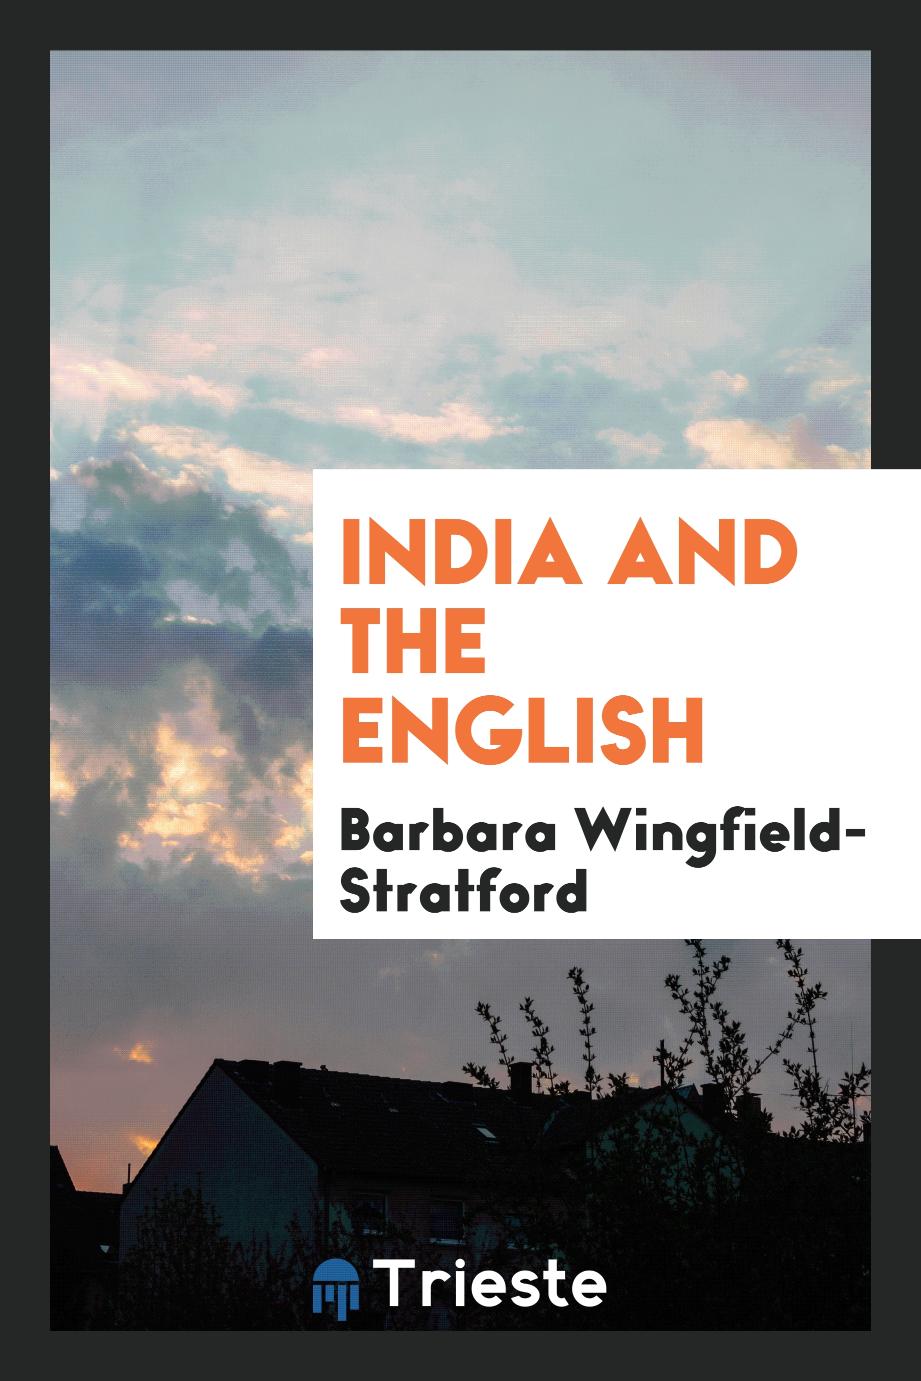 India and the English